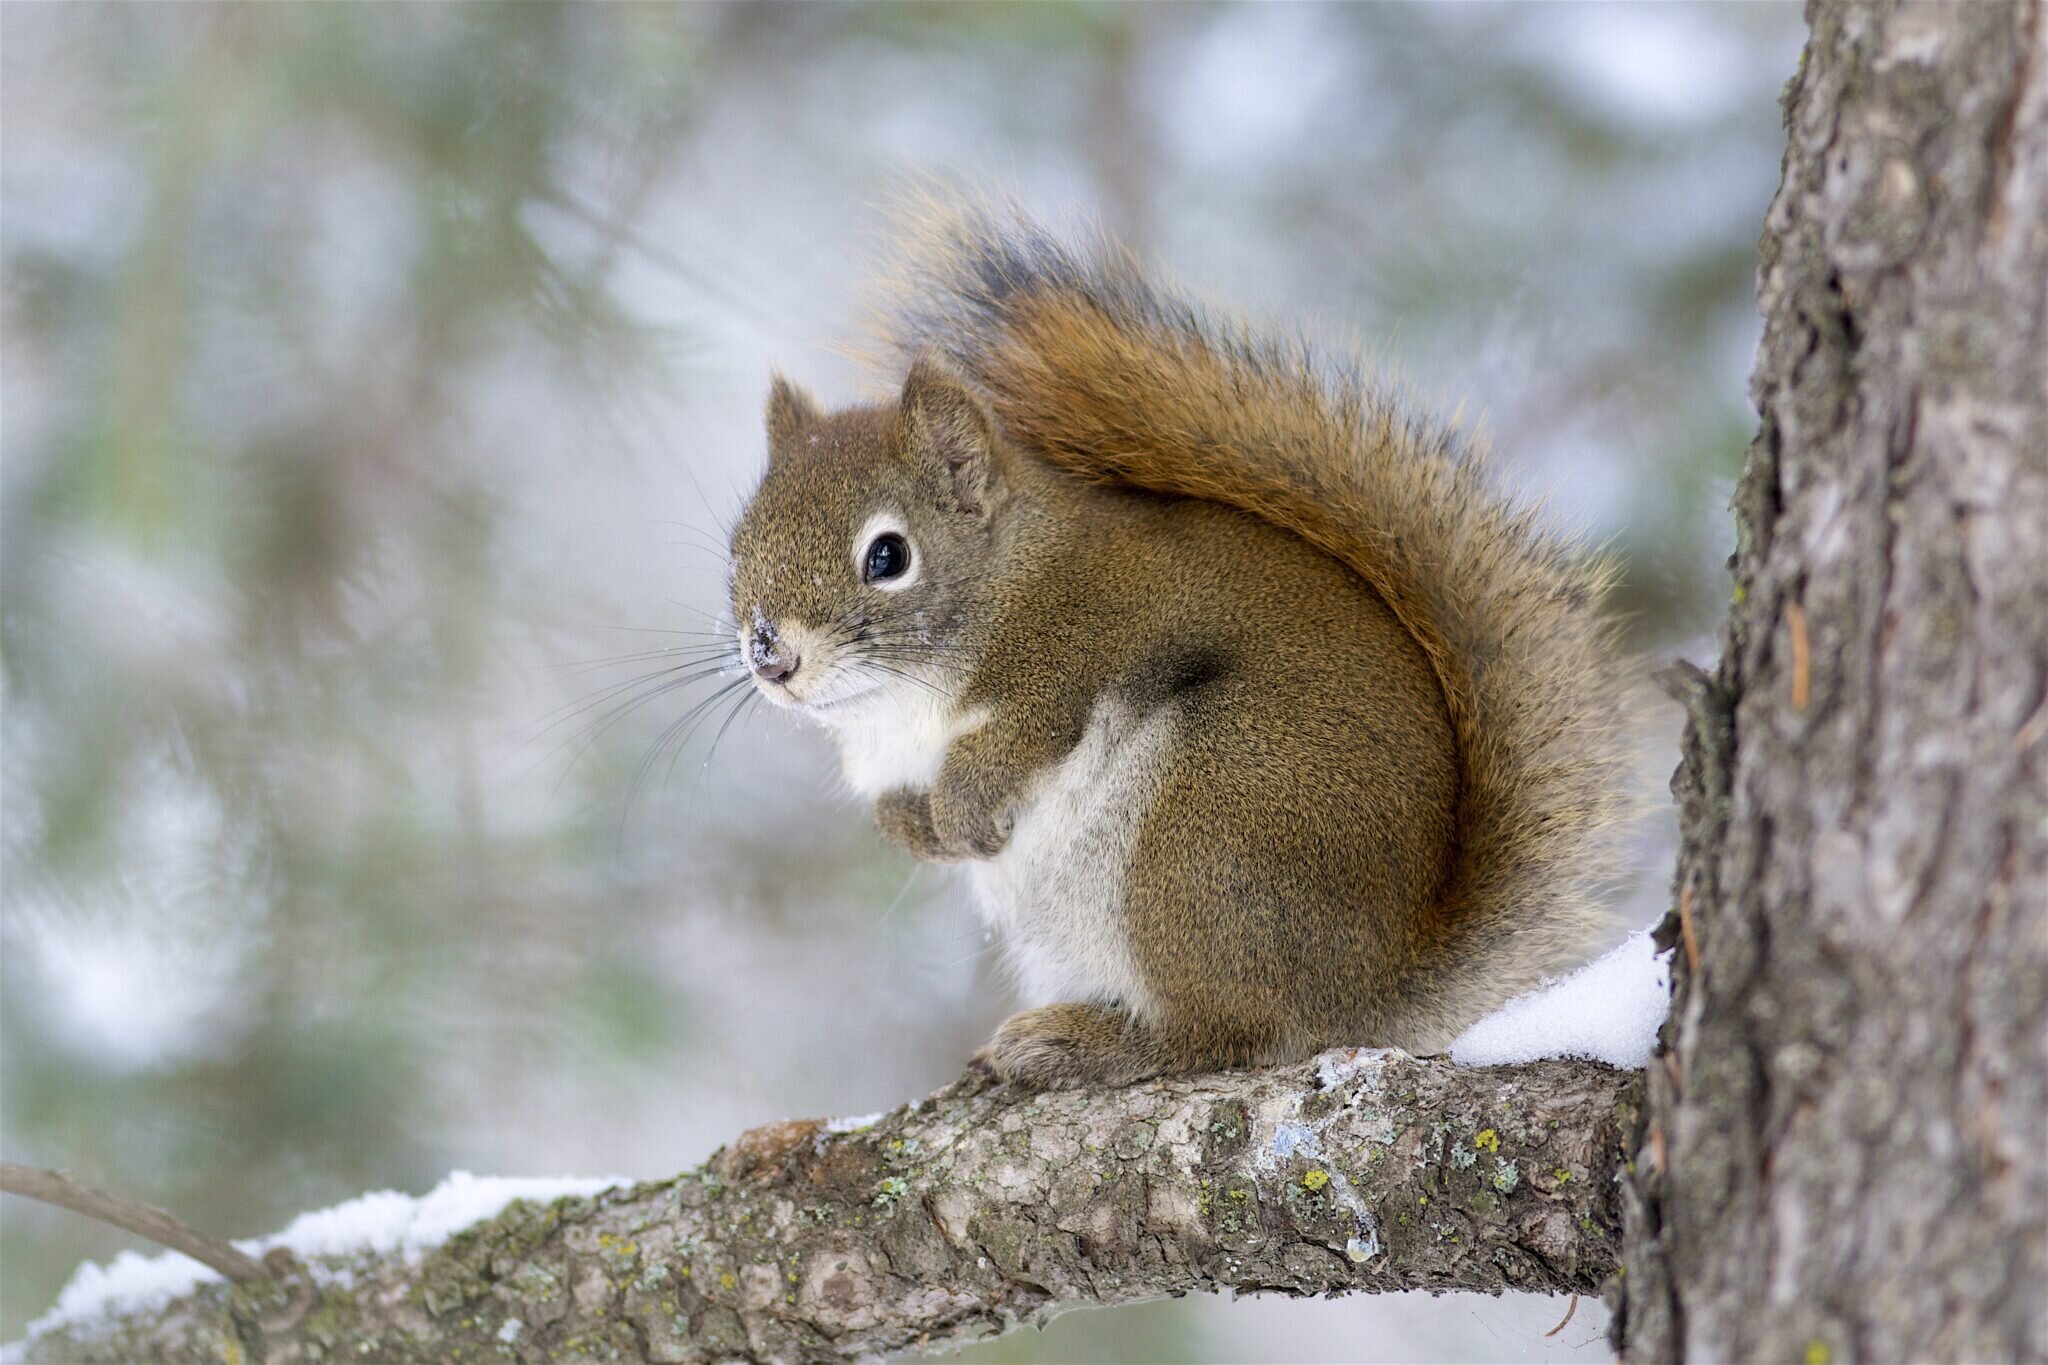 photo of Study suggests squirrels benefit late in life from a food boom that negates early-life adversity image